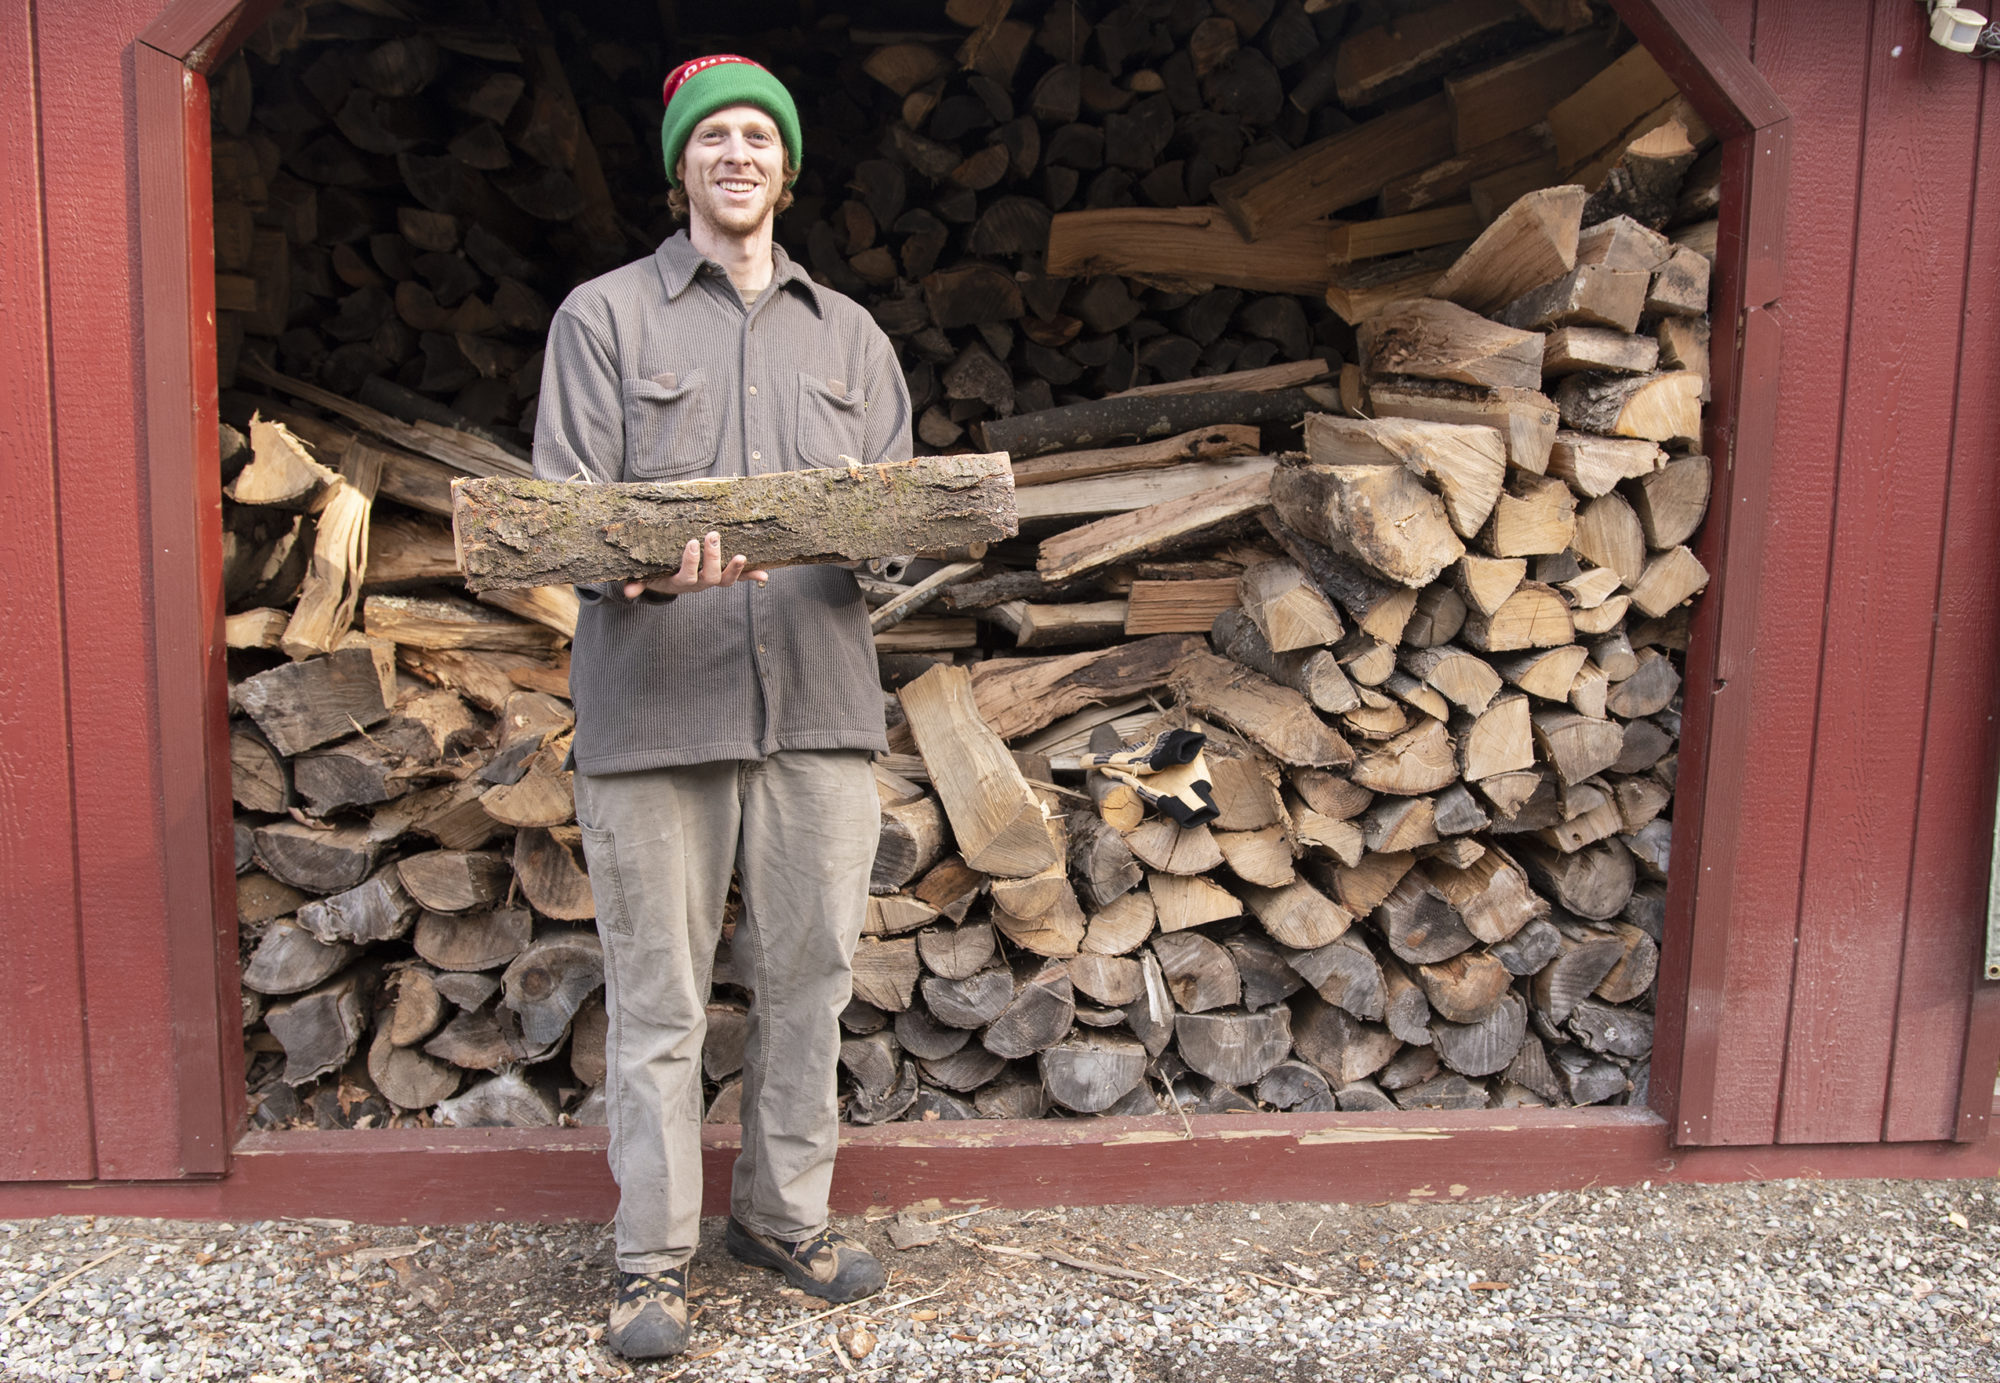 Vermont Vermont Woodworker Jake Checani stands with firewood harvested behind Vermont Woods Studios